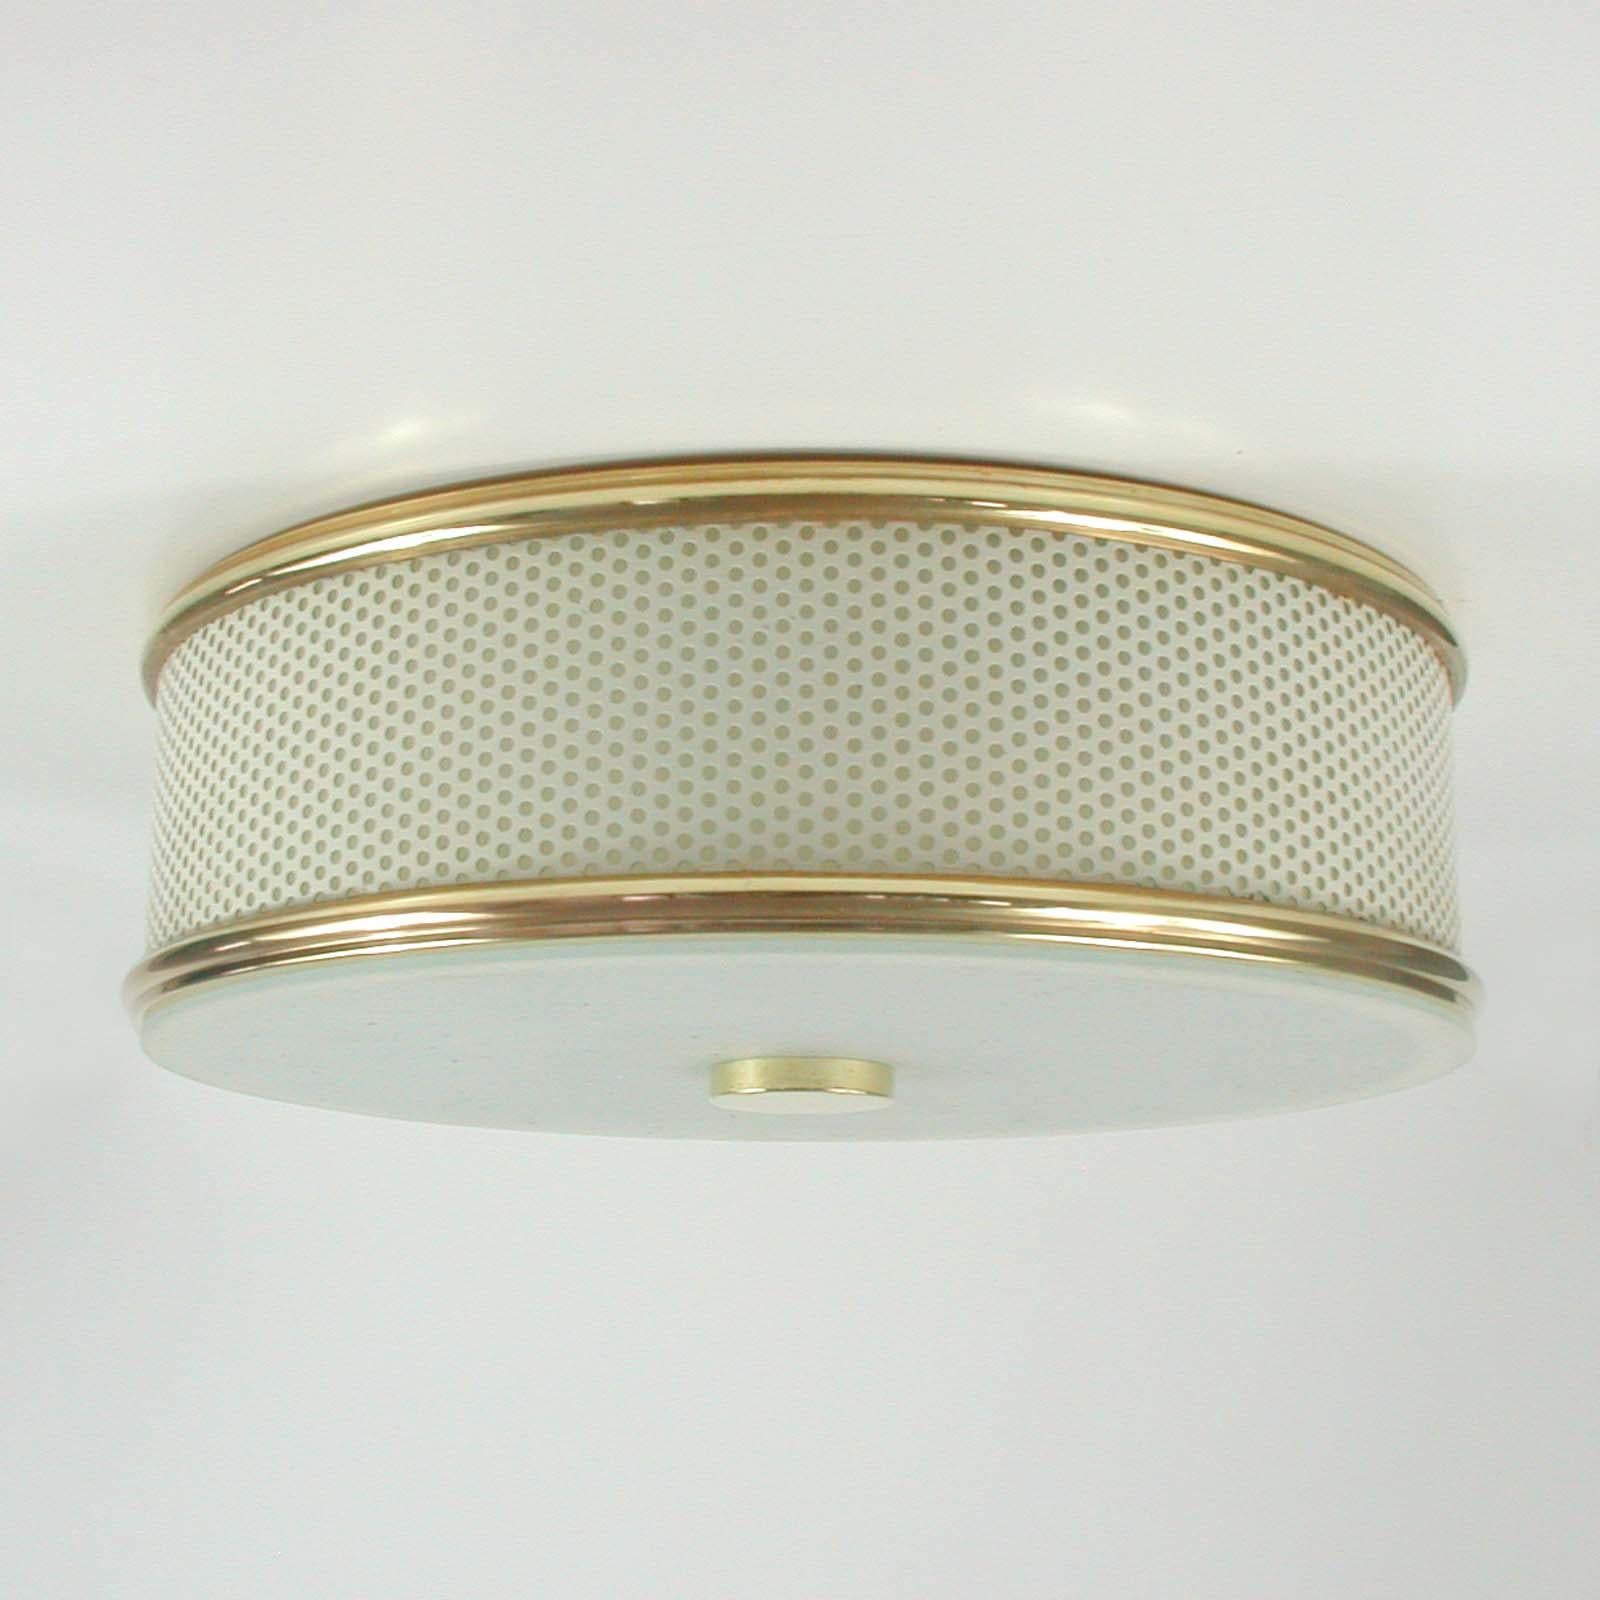 Frosted French Midcentury Cream White and Brass Matégot Style Flushmount, 1950s